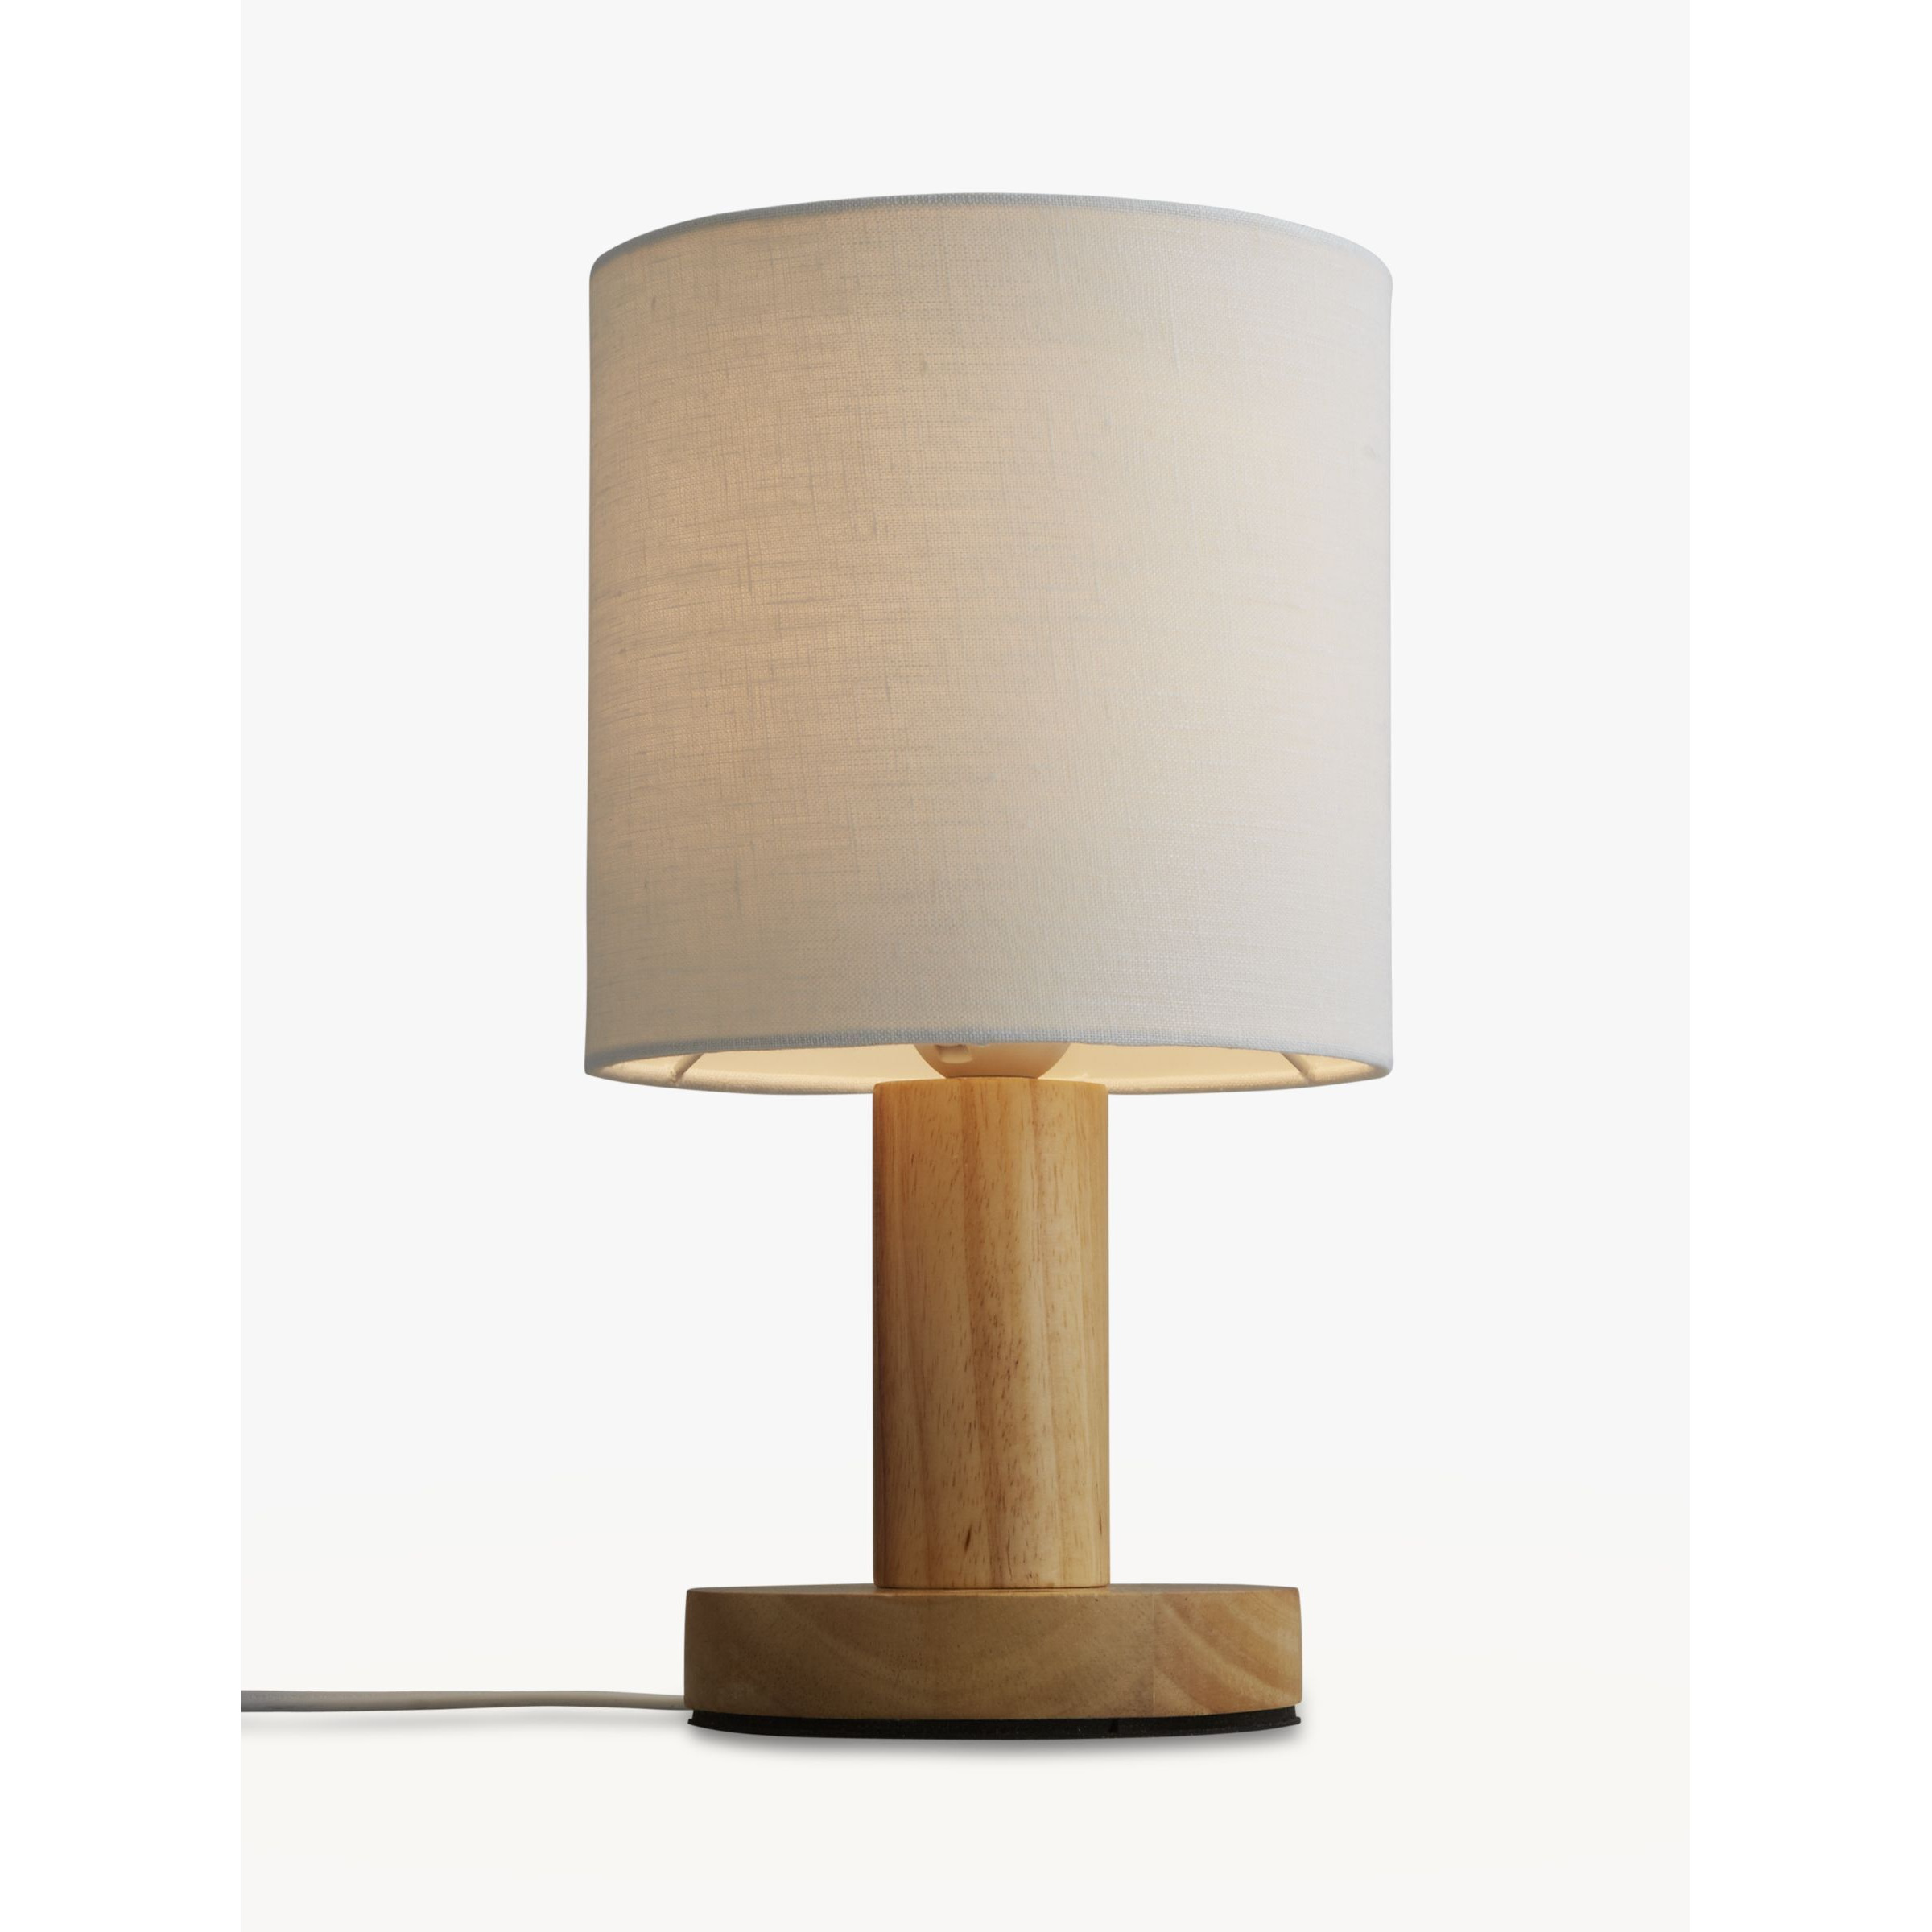 John Lewis ANYDAY Slater Wood Touch Table Lamp - image 1